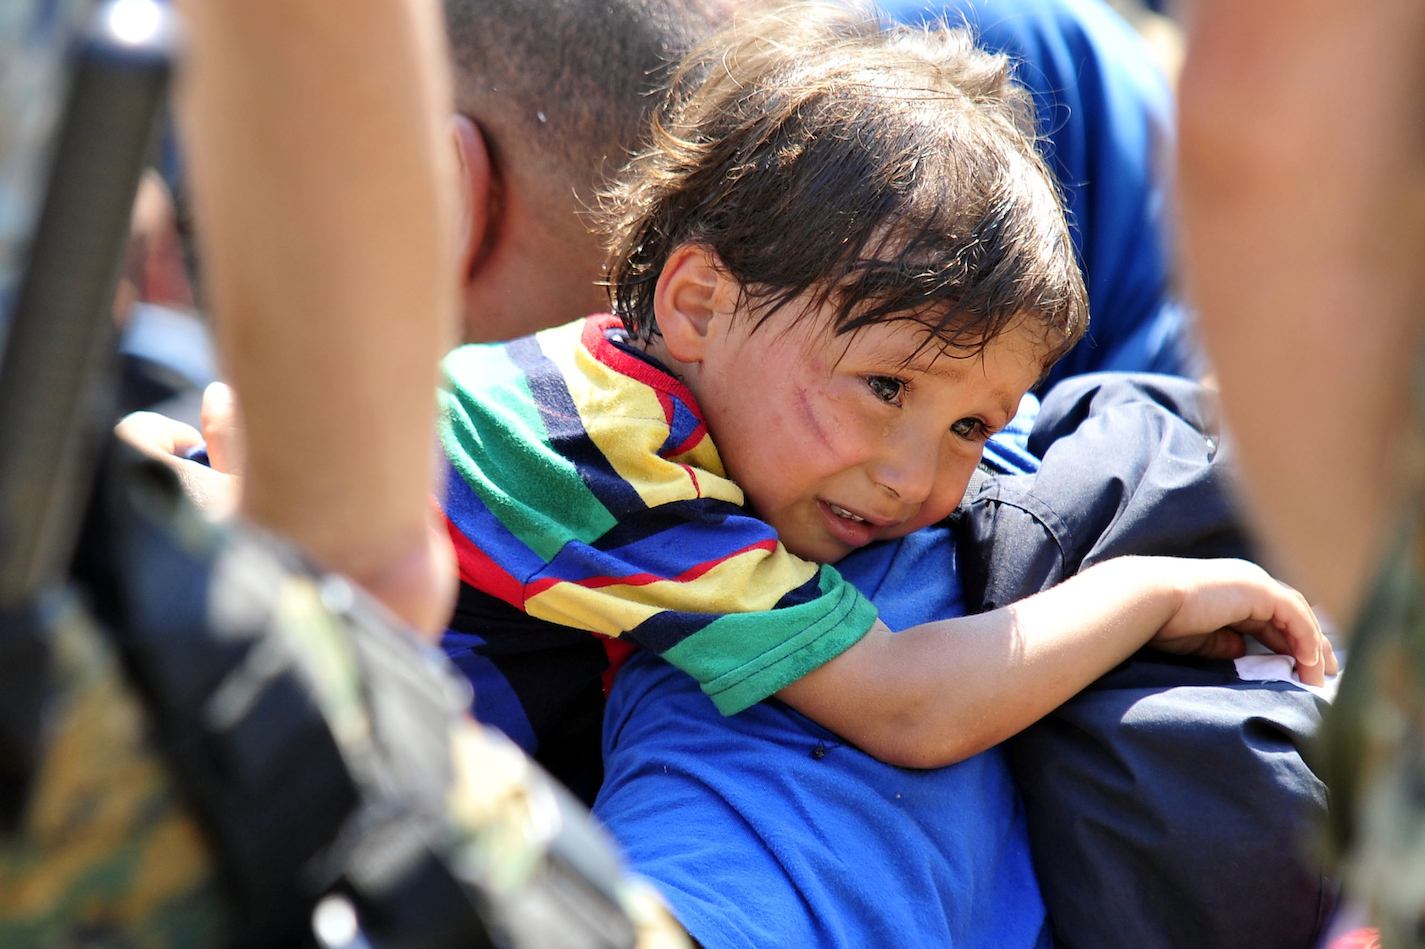 On 26 August, a distressed migrant child rests over a shoulder in a Macedonian town on the border with Greece.